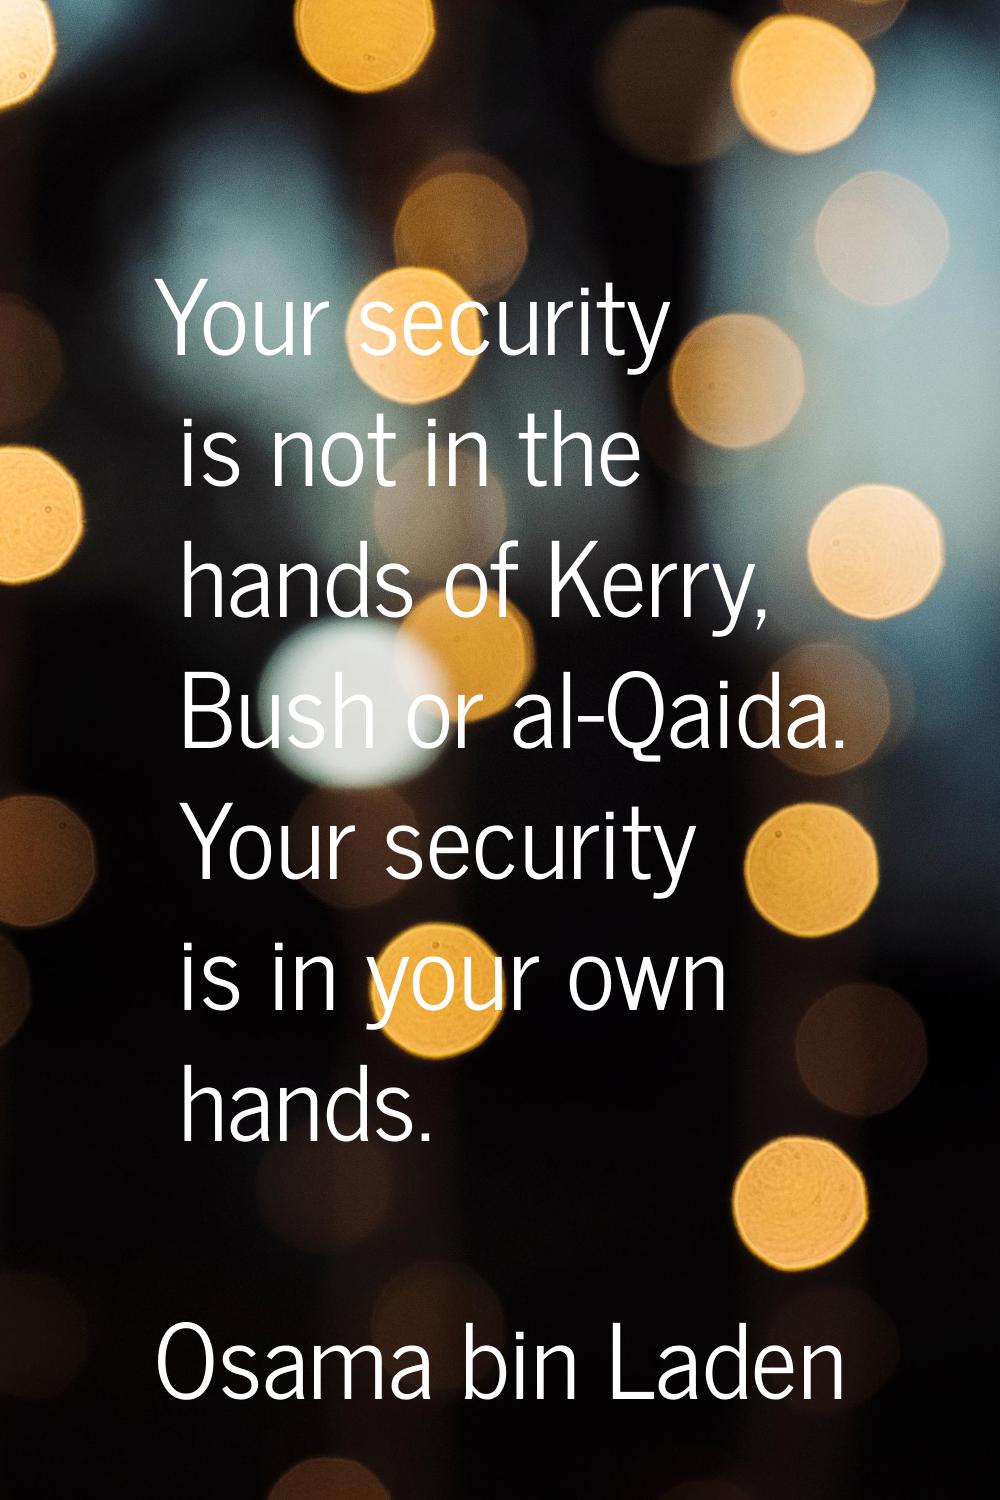 Your security is not in the hands of Kerry, Bush or al-Qaida. Your security is in your own hands.